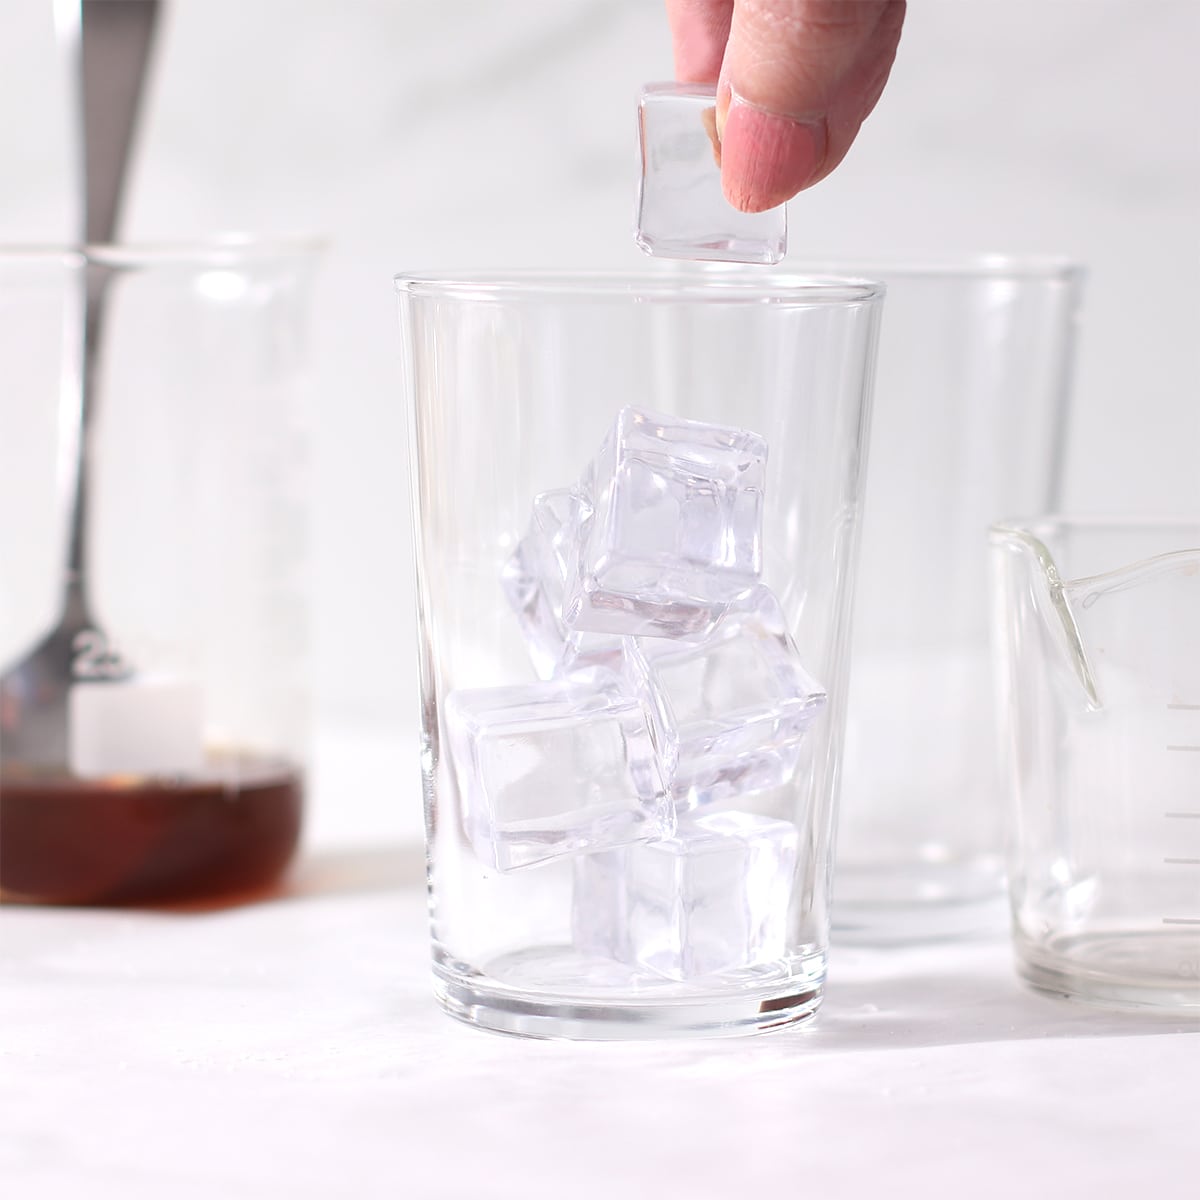 adding ice to a glass for iced coffee.